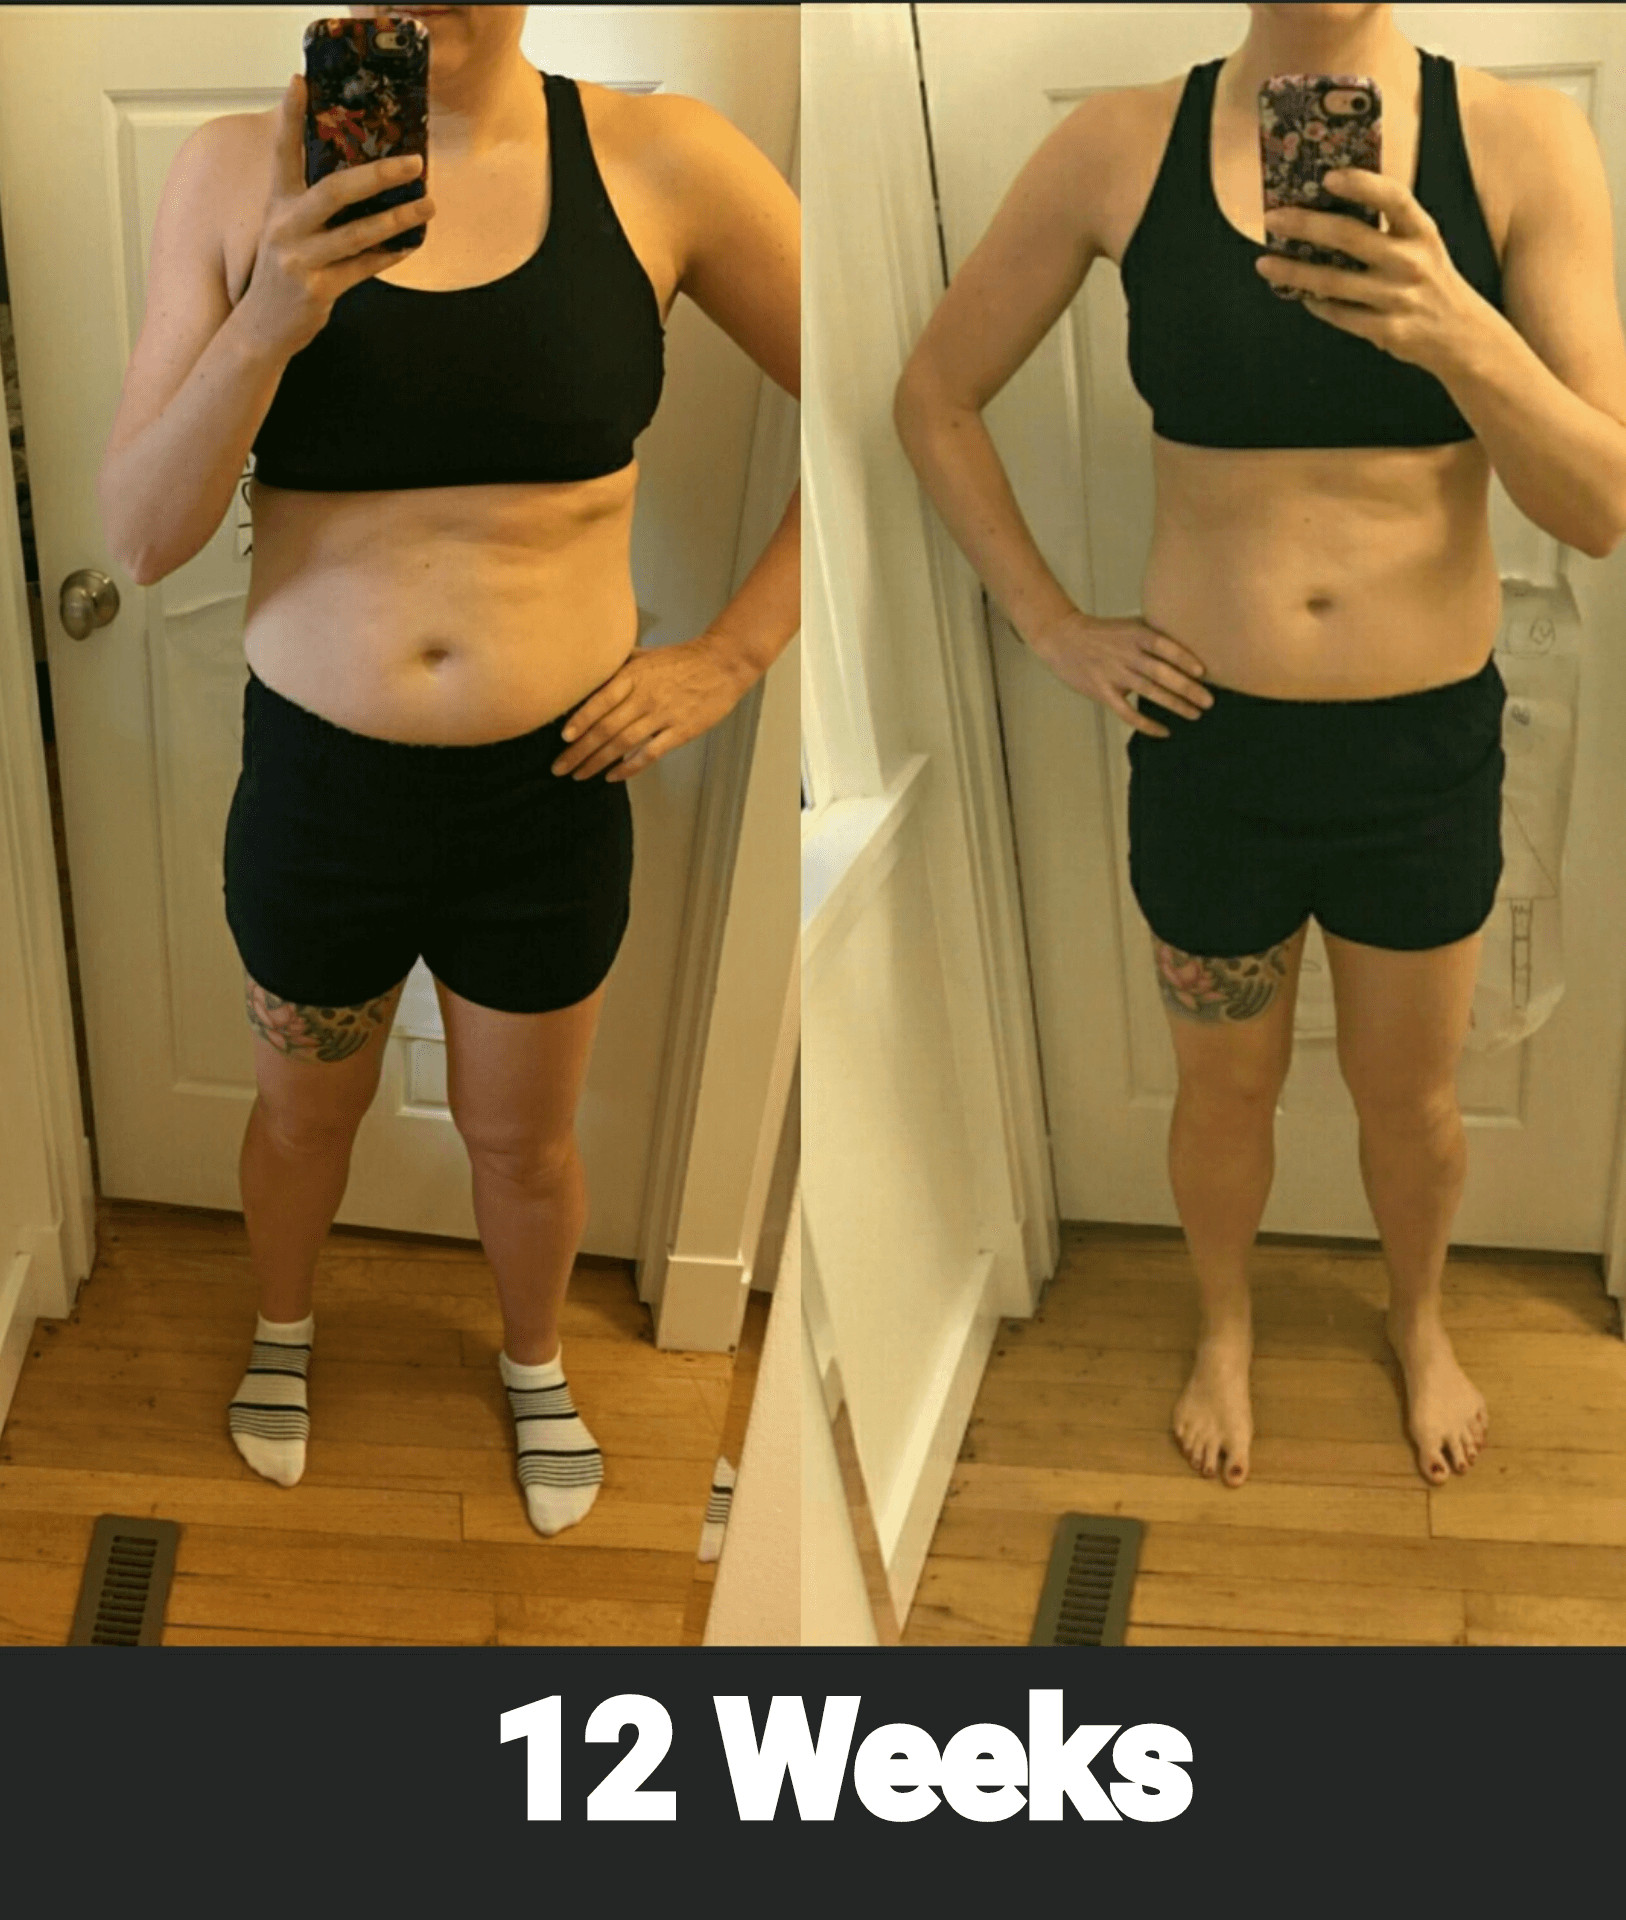 Results after 12 weeks of working with Chris Willburn